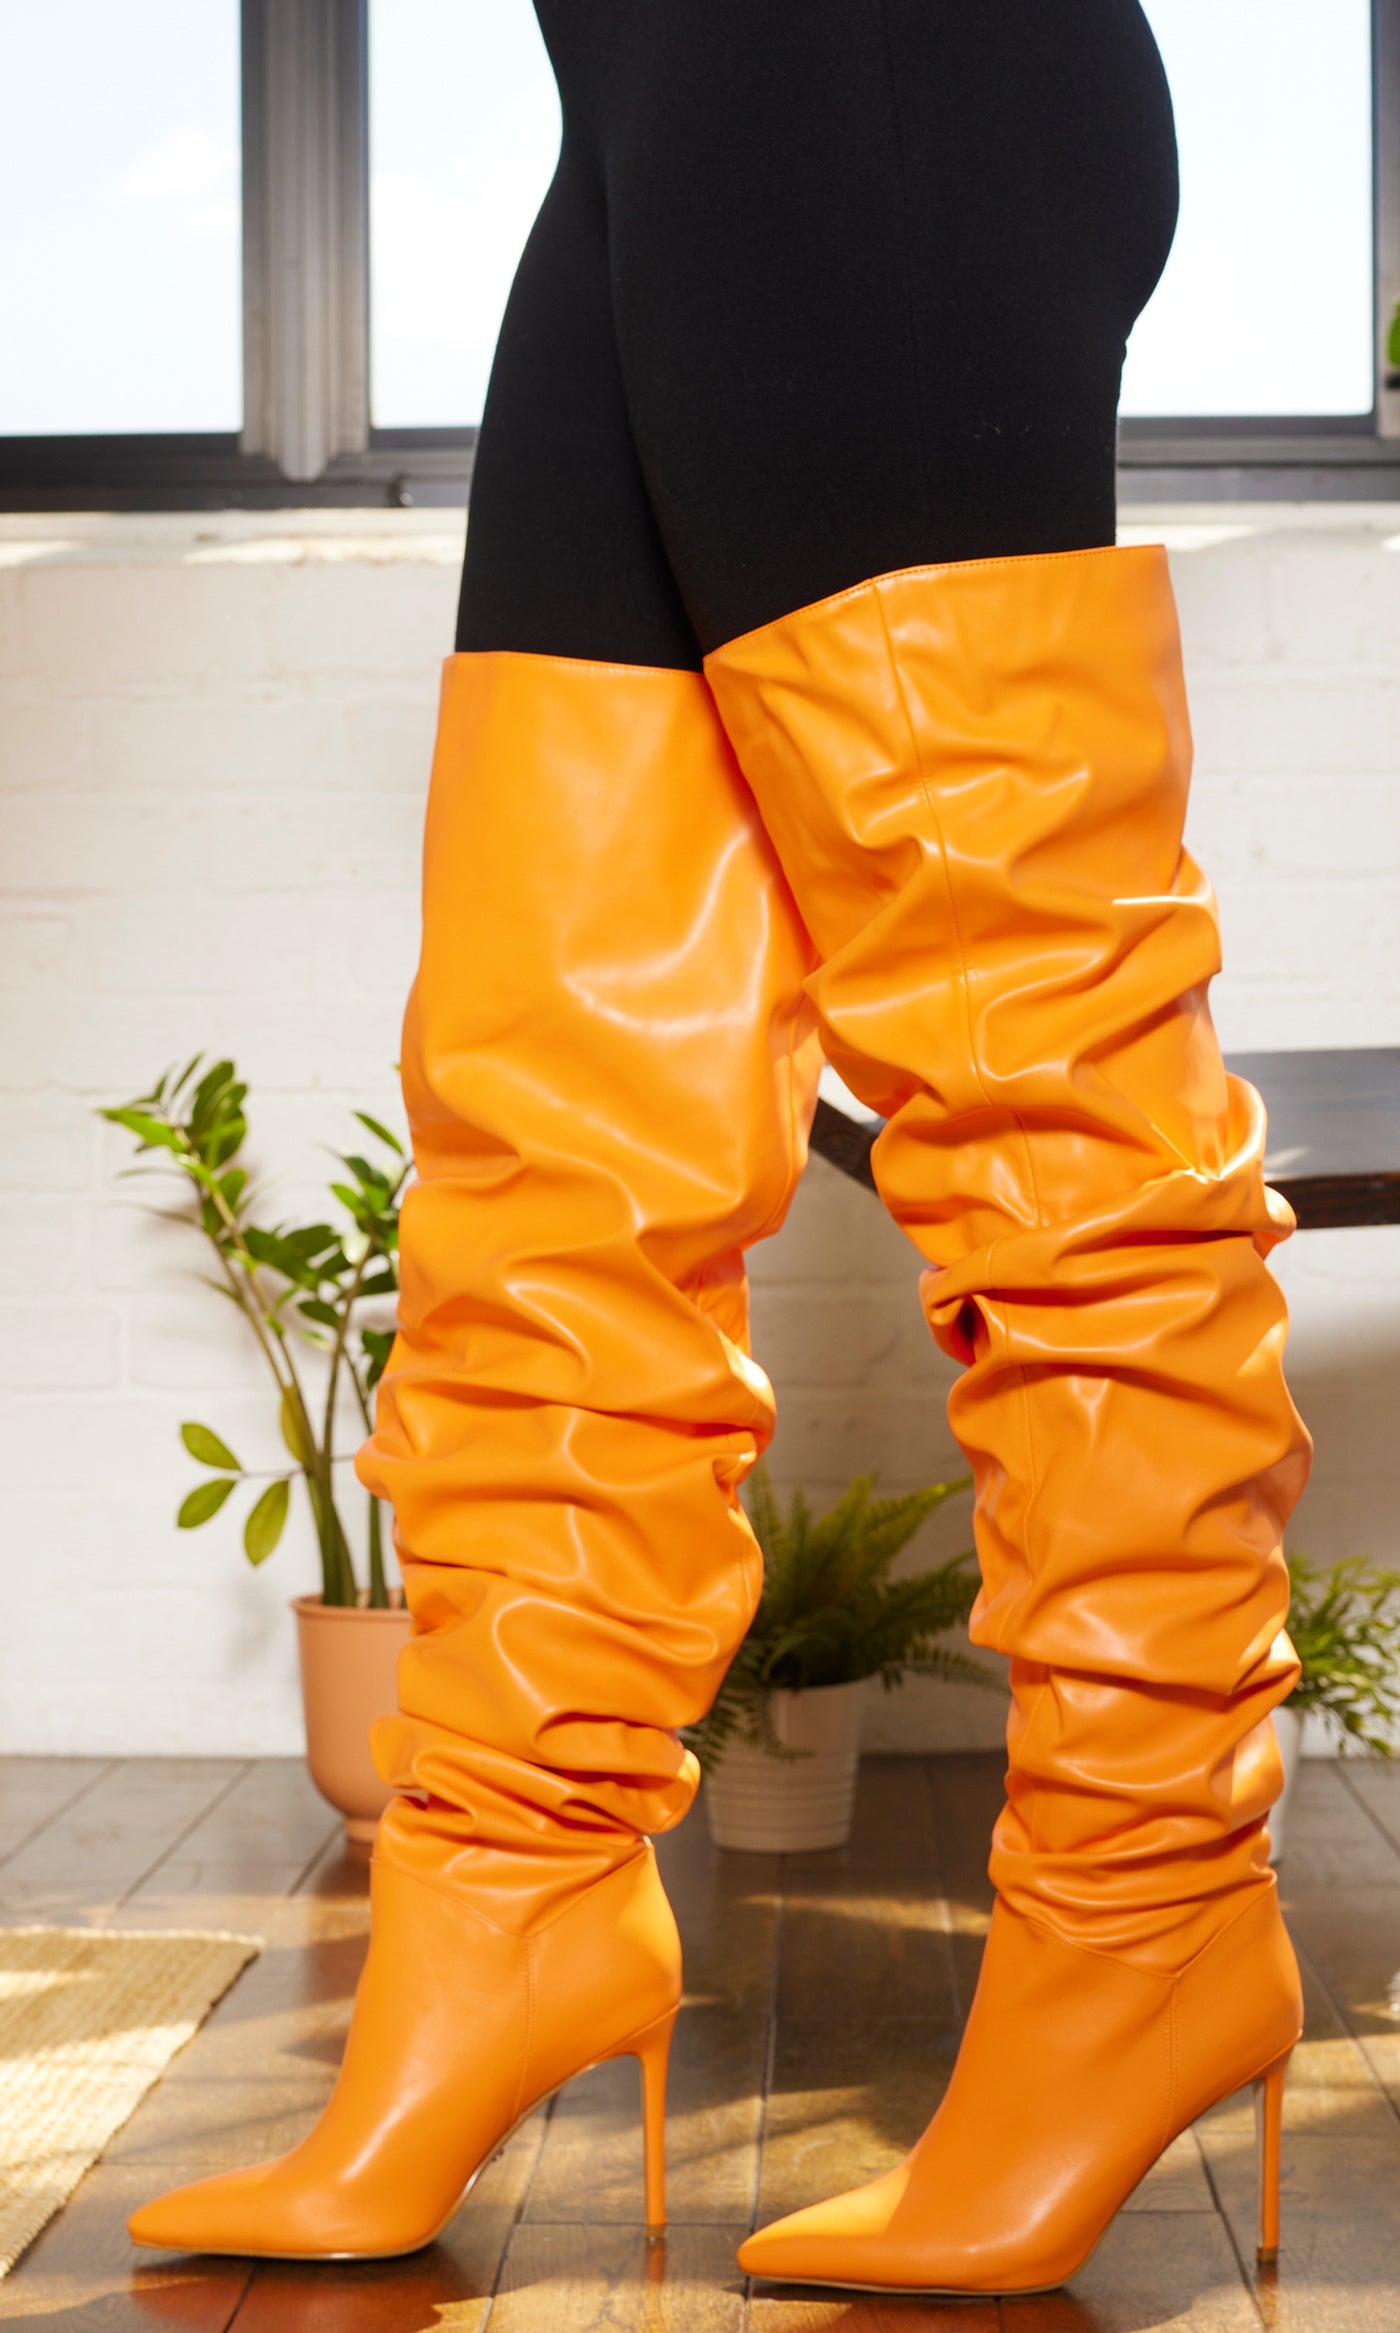 Orange Faux Leather Runched Boots PREORDER Ships Early October - Cutely Covered